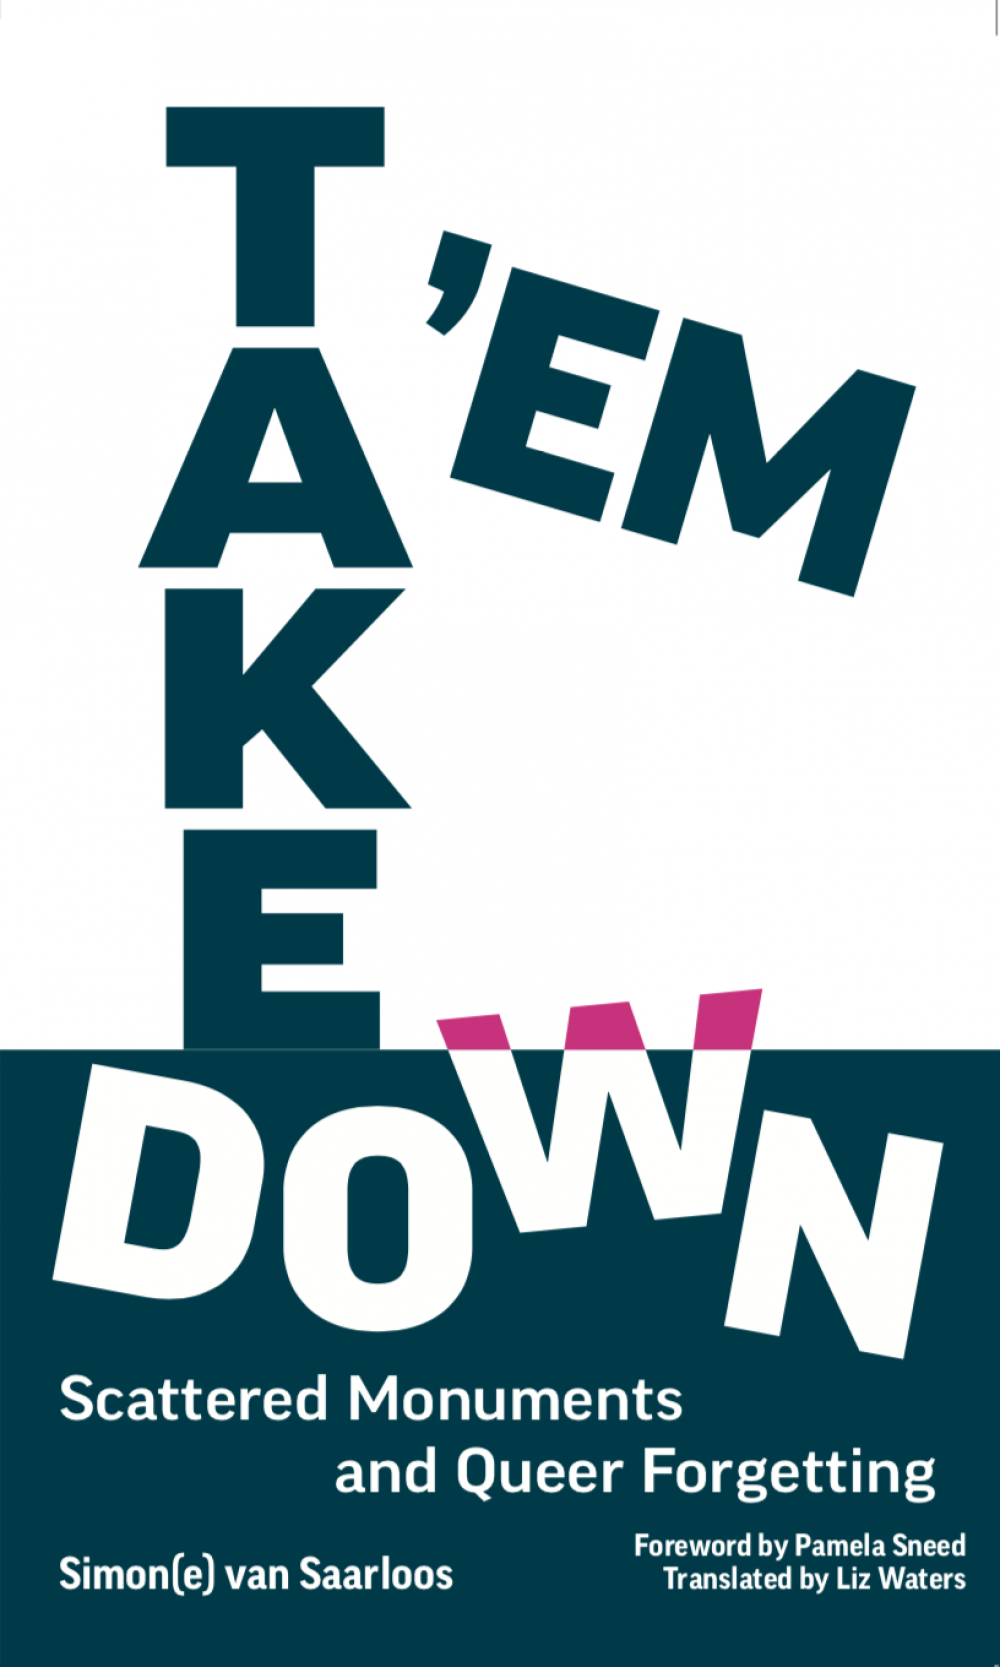  - Take 'Em Down: Scattered Monuments and Queer Forgetting by Simon(e) van Saarloos in conversation with Claire Finch !